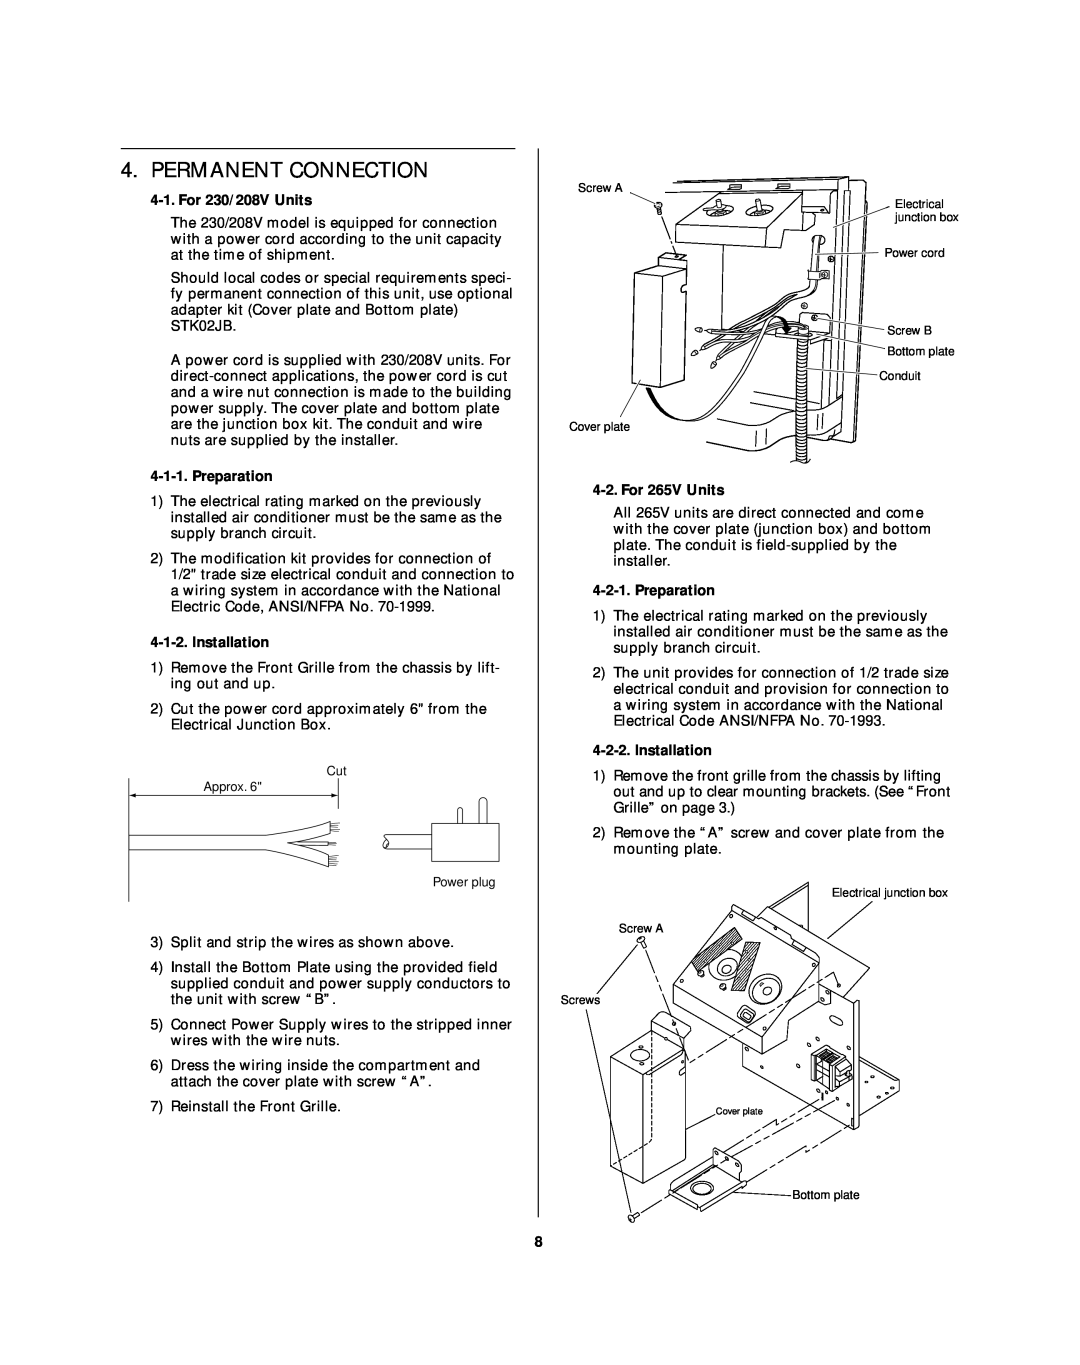 Sanyo STW-2 Series owner manual Permanent Connection, For 230/208V Units, Preparation, Installation, For 265V Units 